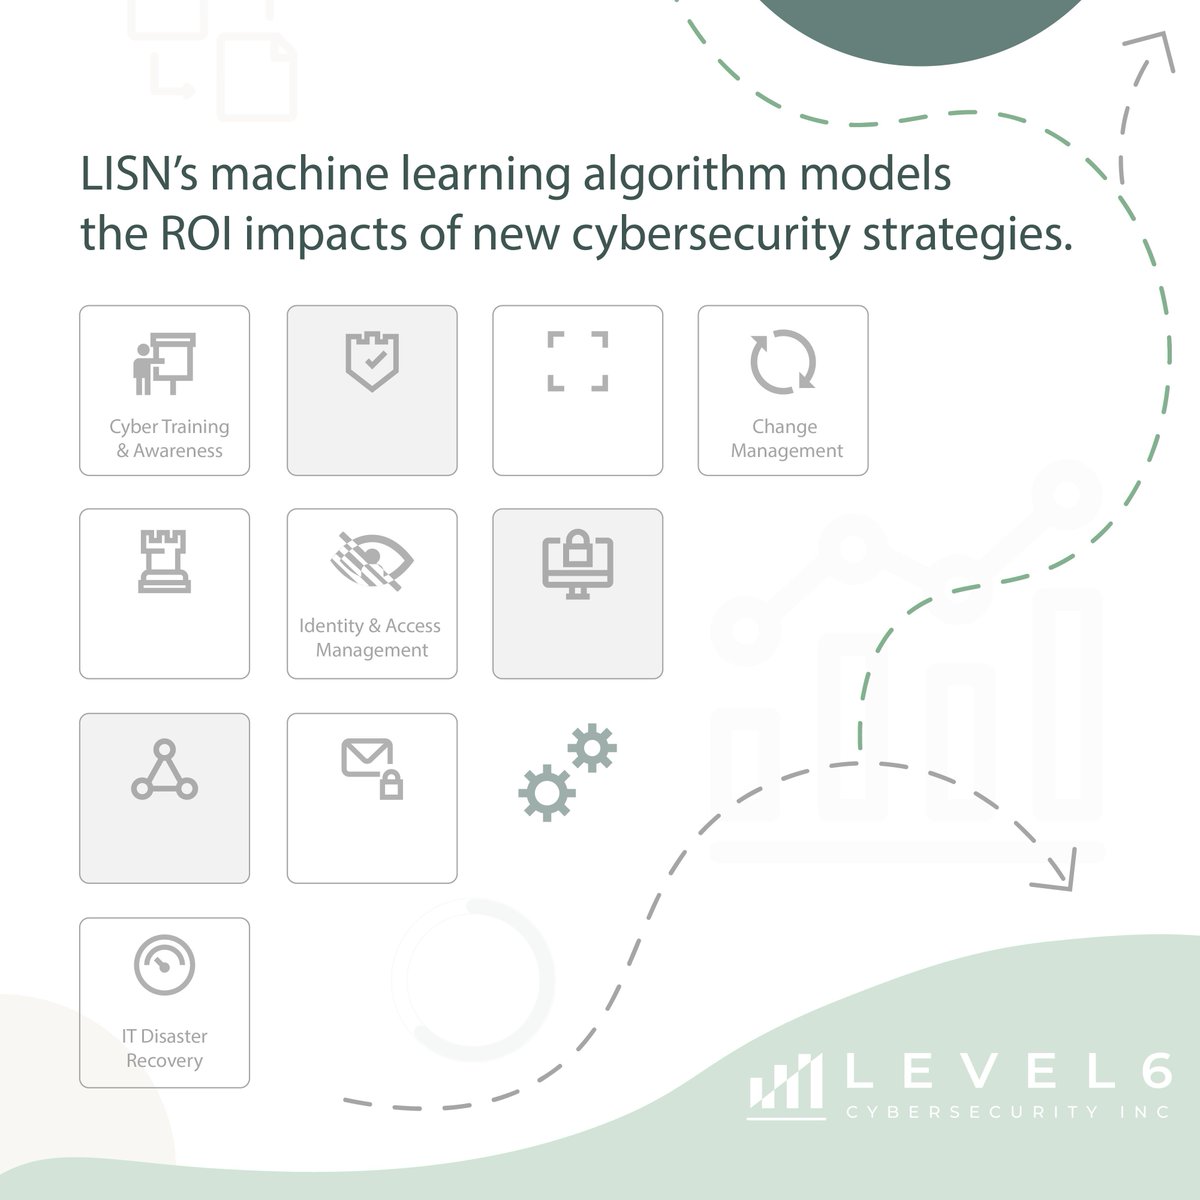 LISN runs our global pool of cybersecurity success and failure data through a patent-pending #machinelearning algorithm to calculate the predicted ROI impact of potential cybersecurity strategies before they're implemented in the real world.

#aianalytics #interactiveanalysis